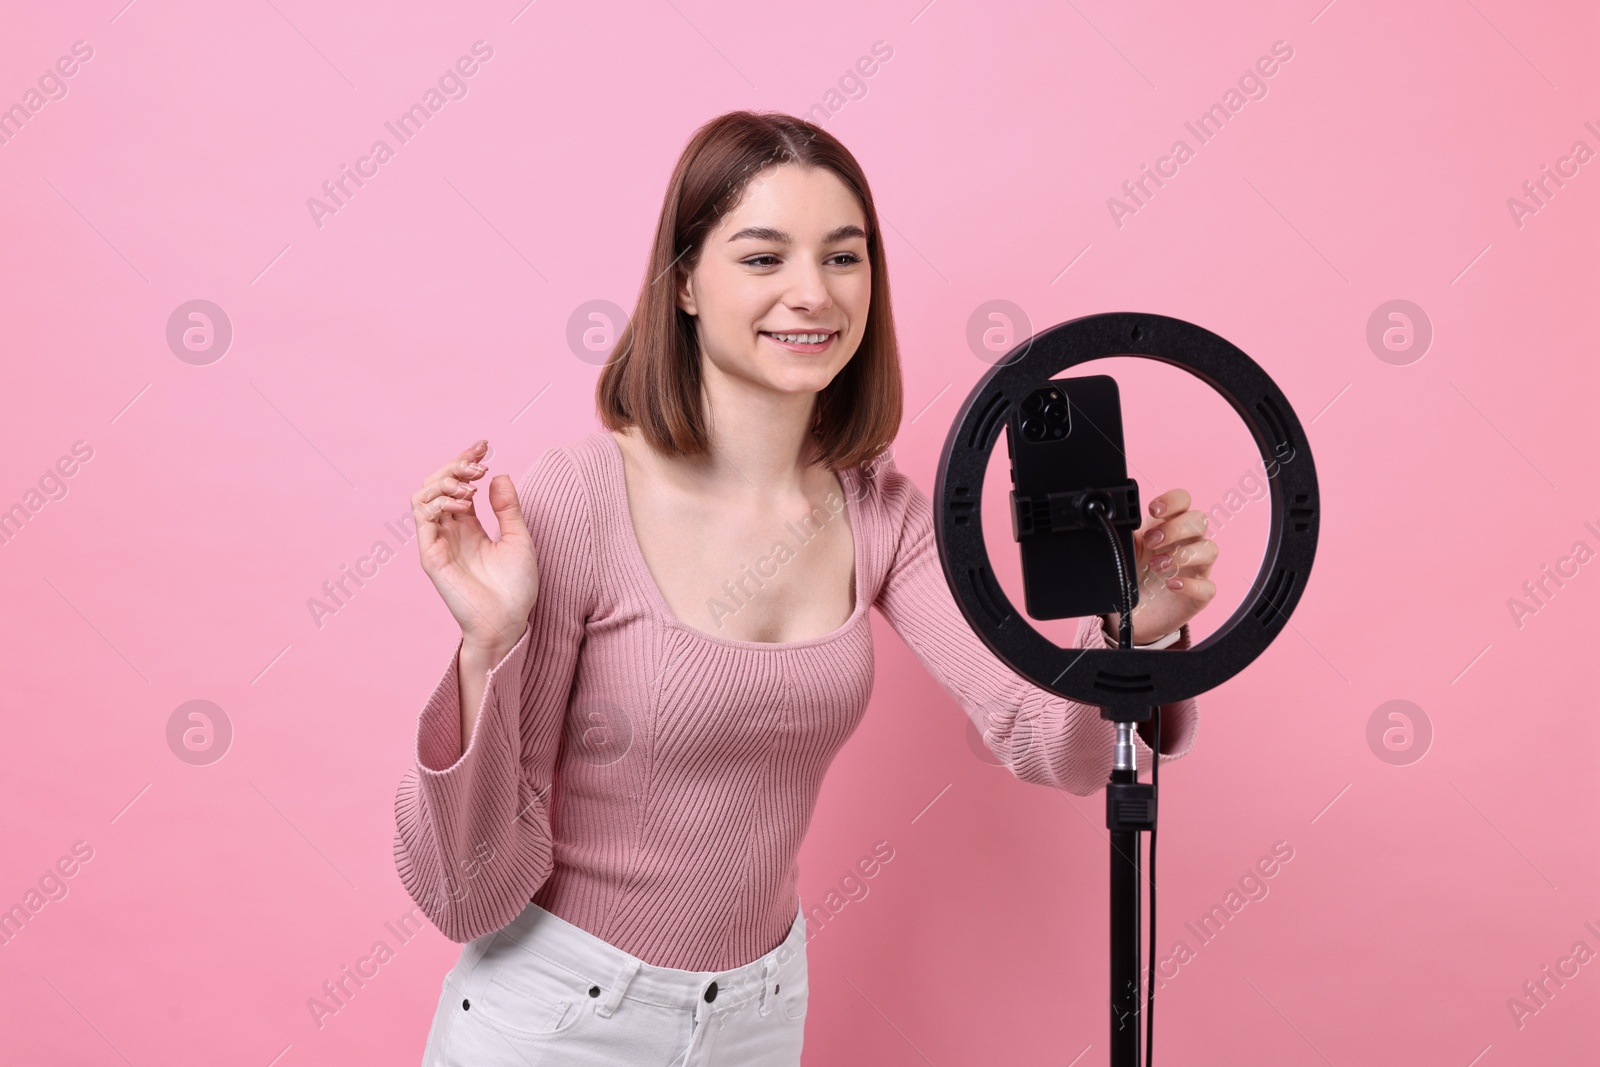 Photo of Blogger recording video with smartphone and ring lamp on pink background